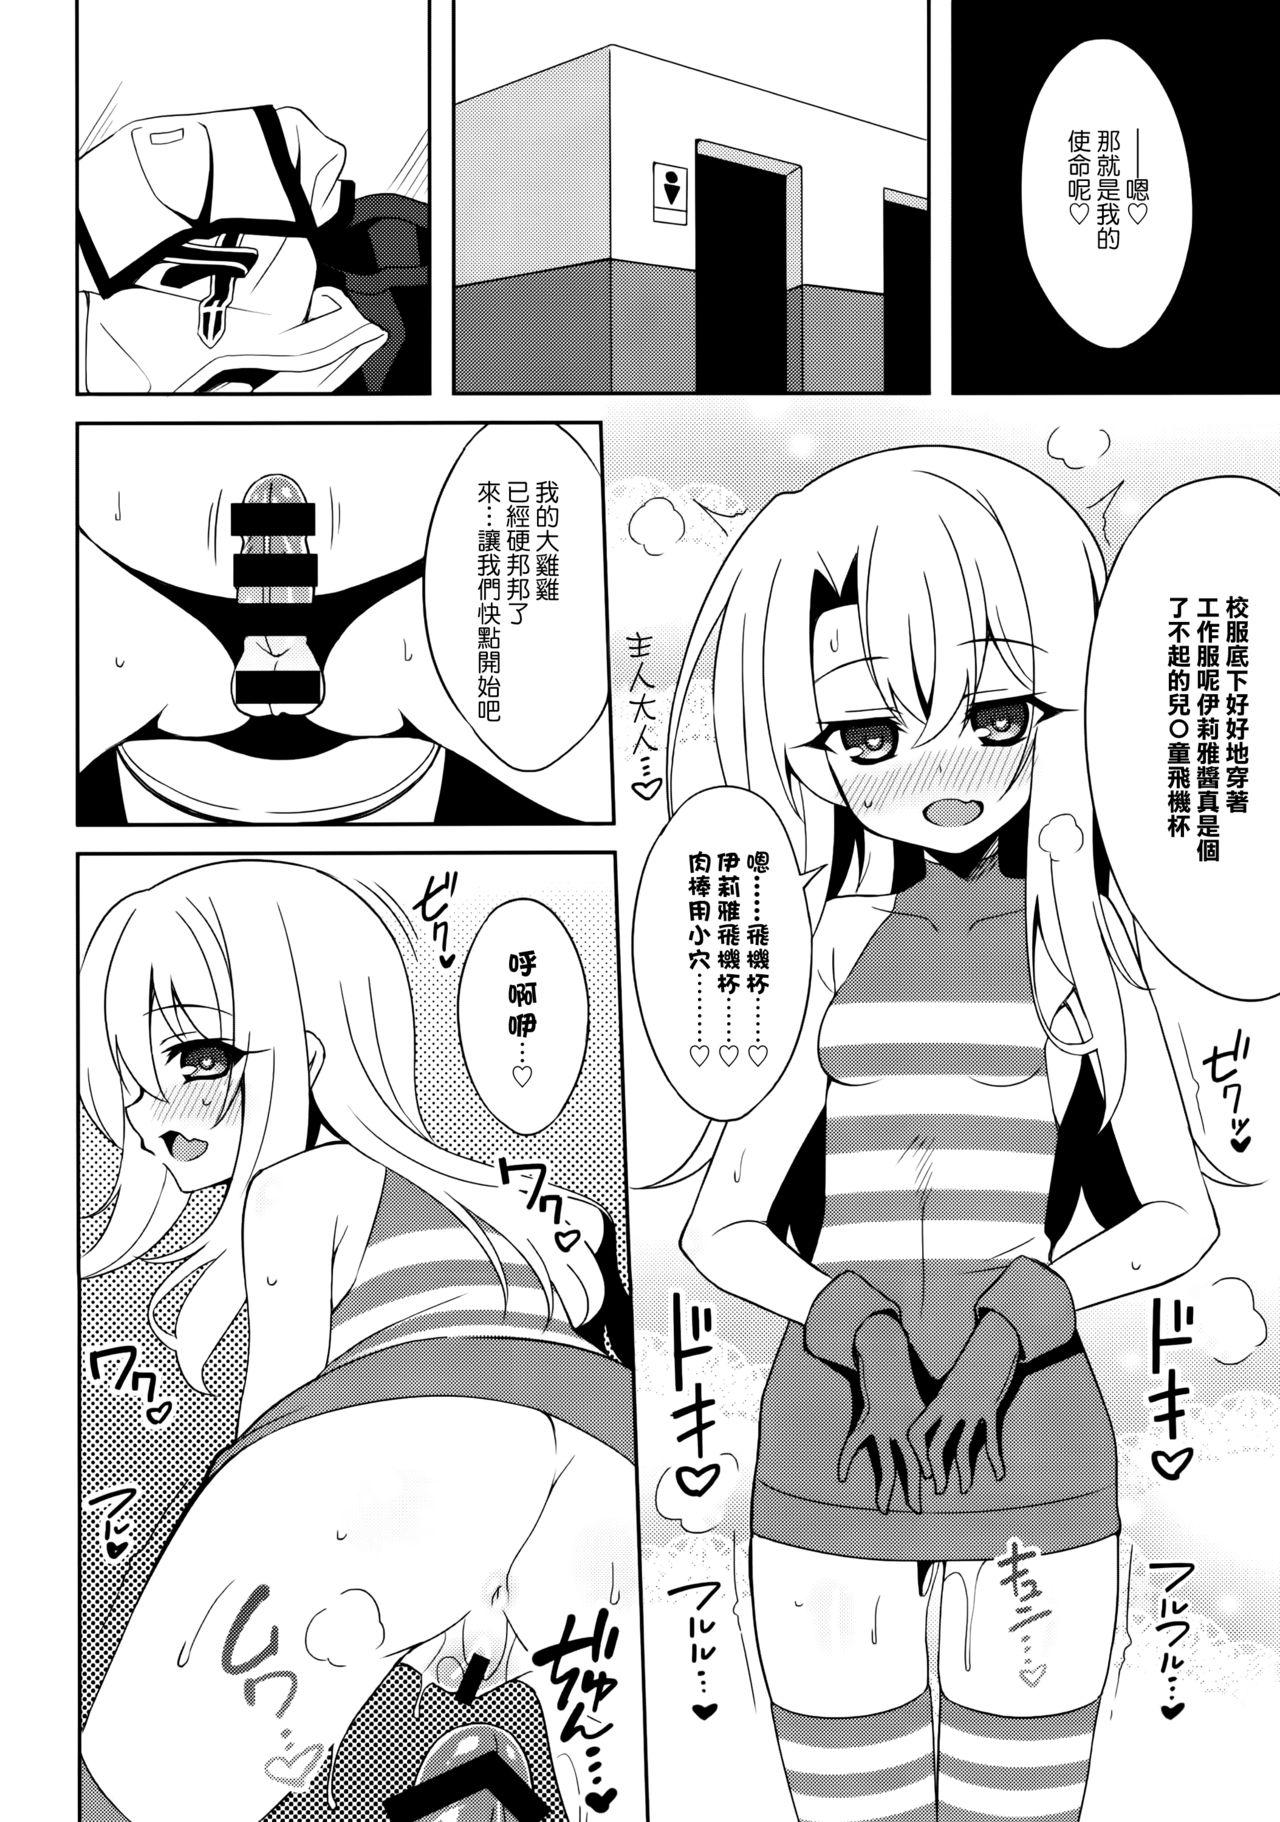  Marunaho-chan Install - Fate kaleid liner prisma illya Caught - Page 5